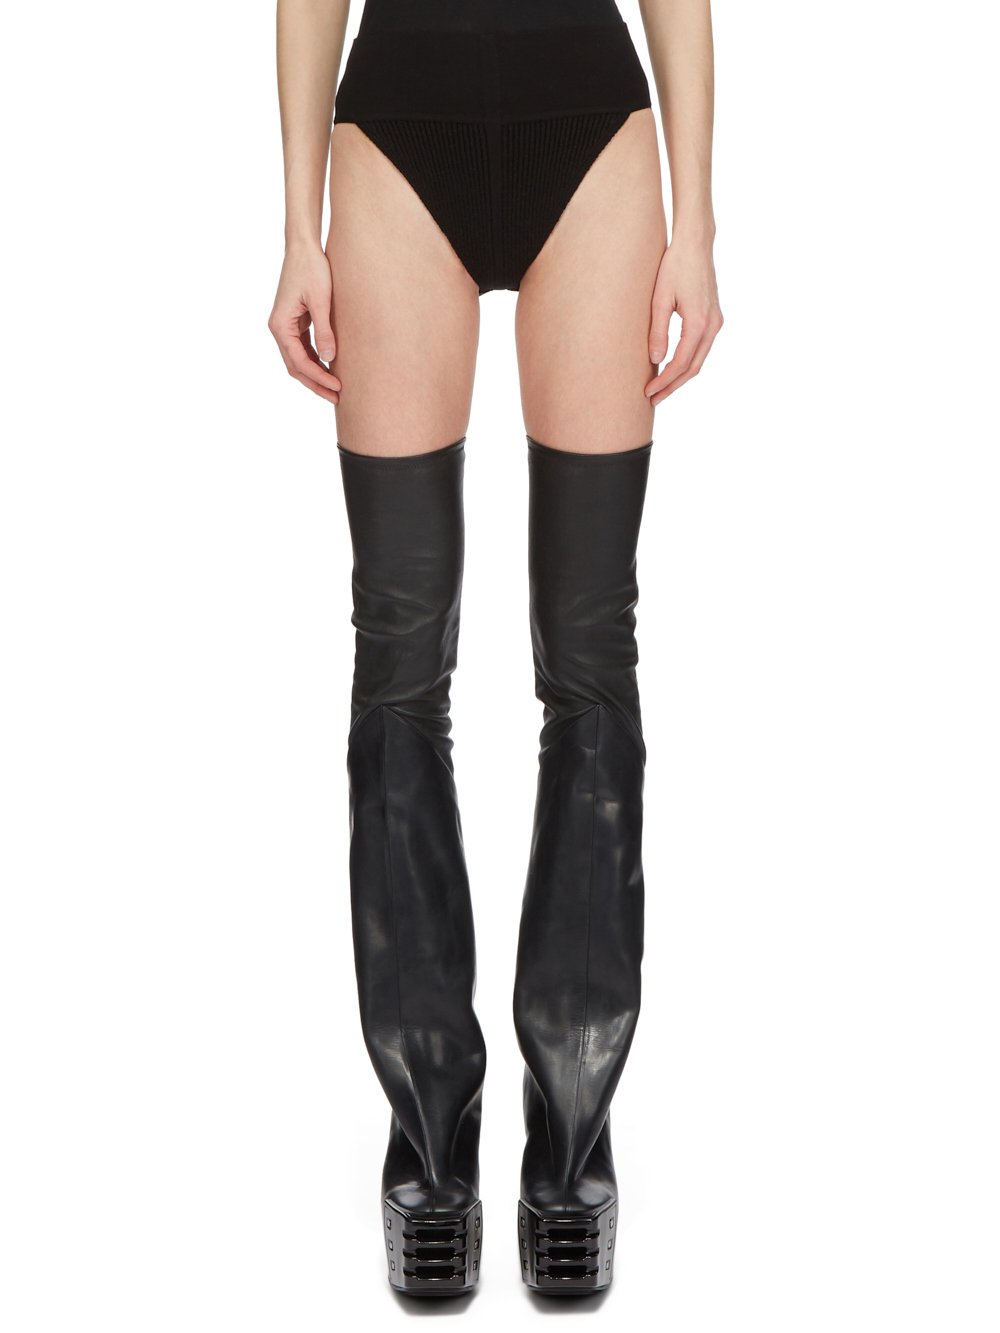 RICK OWENS FW23 LUXOR RUNWAY PANTIES IN BLACK HEAVY RIB RECYCLED CASHMERE